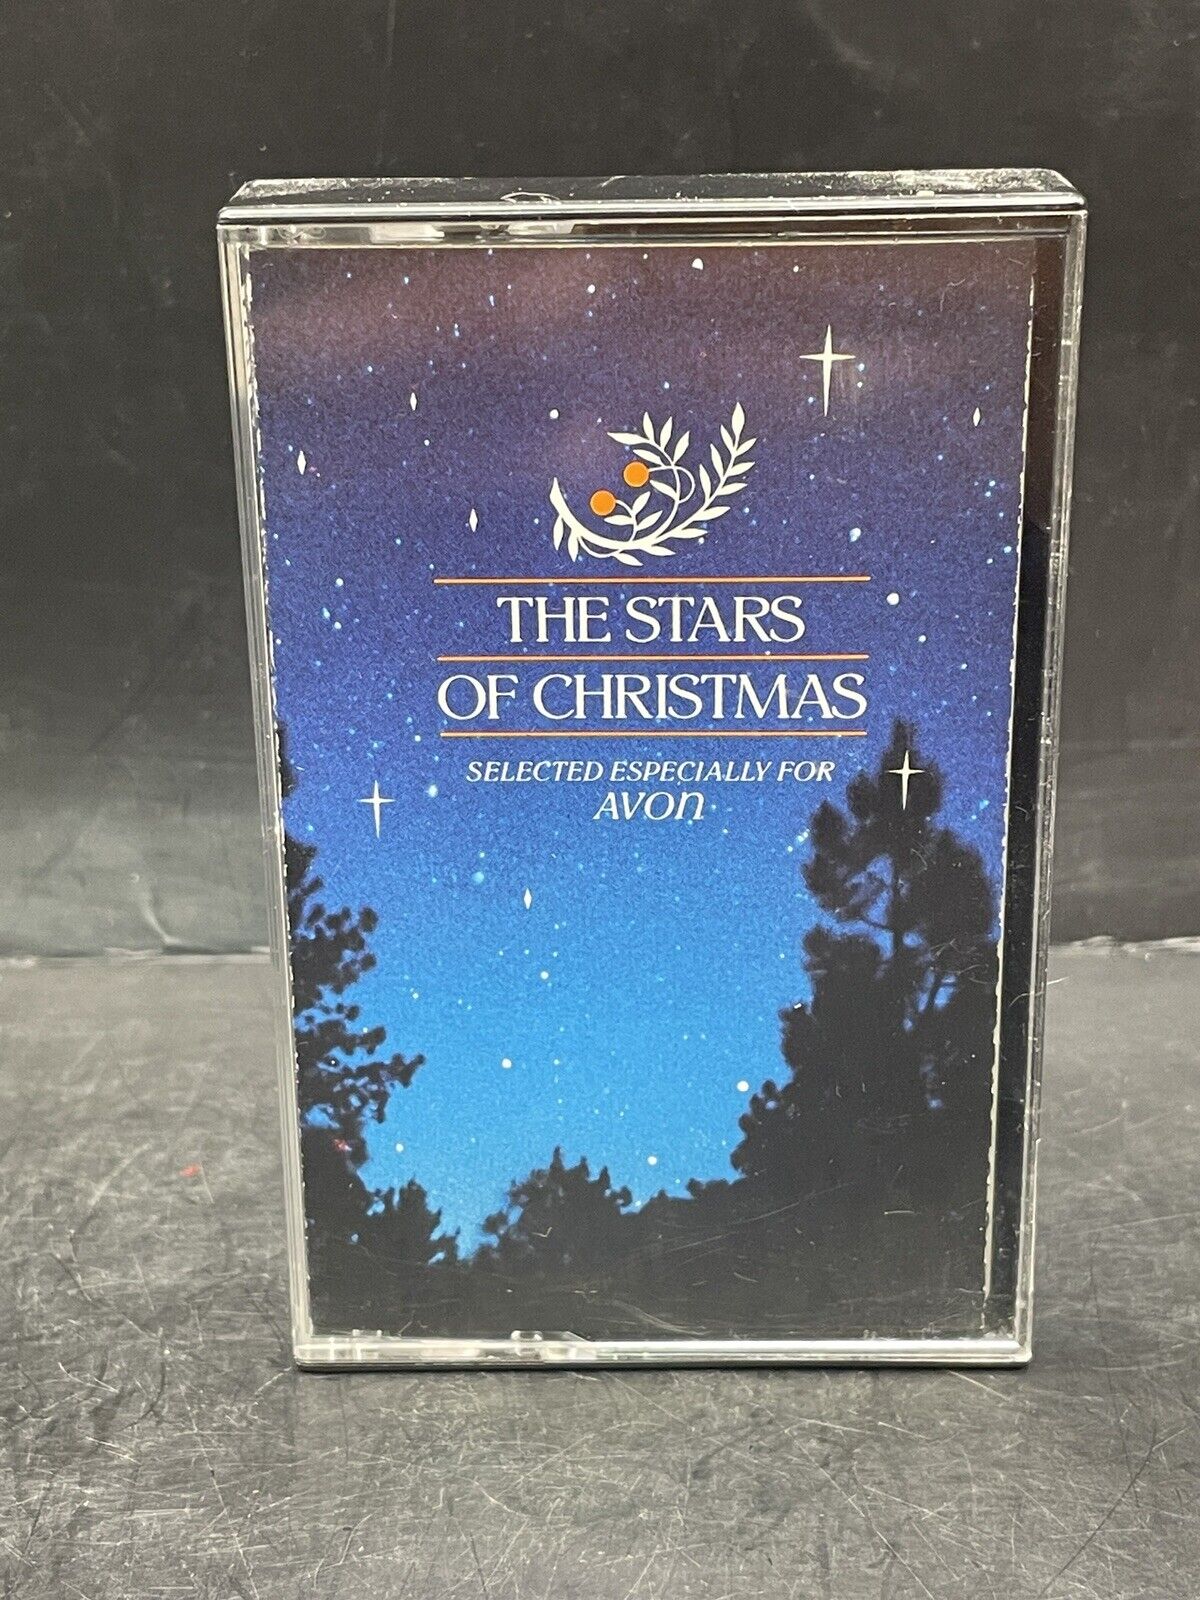 Vintage Avon The Stars of Christmas by Various Artists (Cassette, 1988) GA41